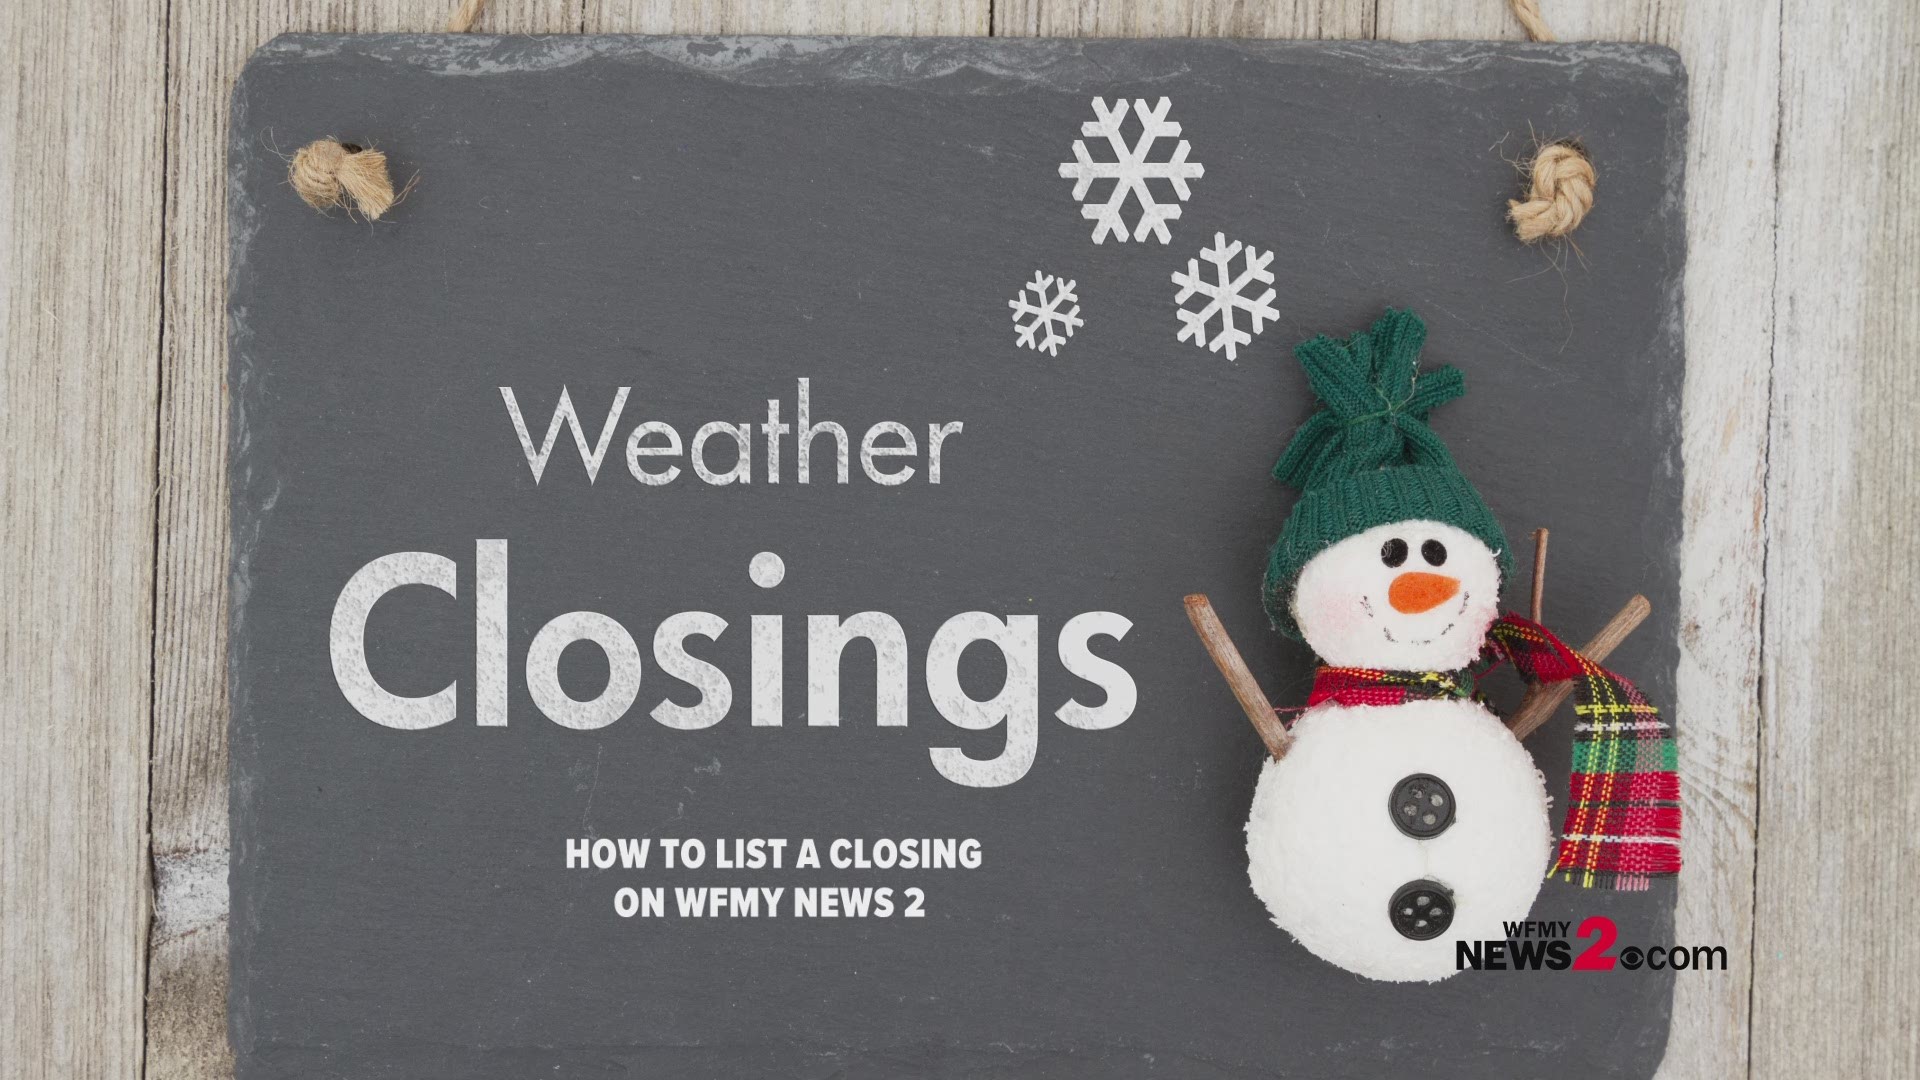 Here's what you need to know in order to get a snow code for a closing to appear on WFMY News 2's closing lists.